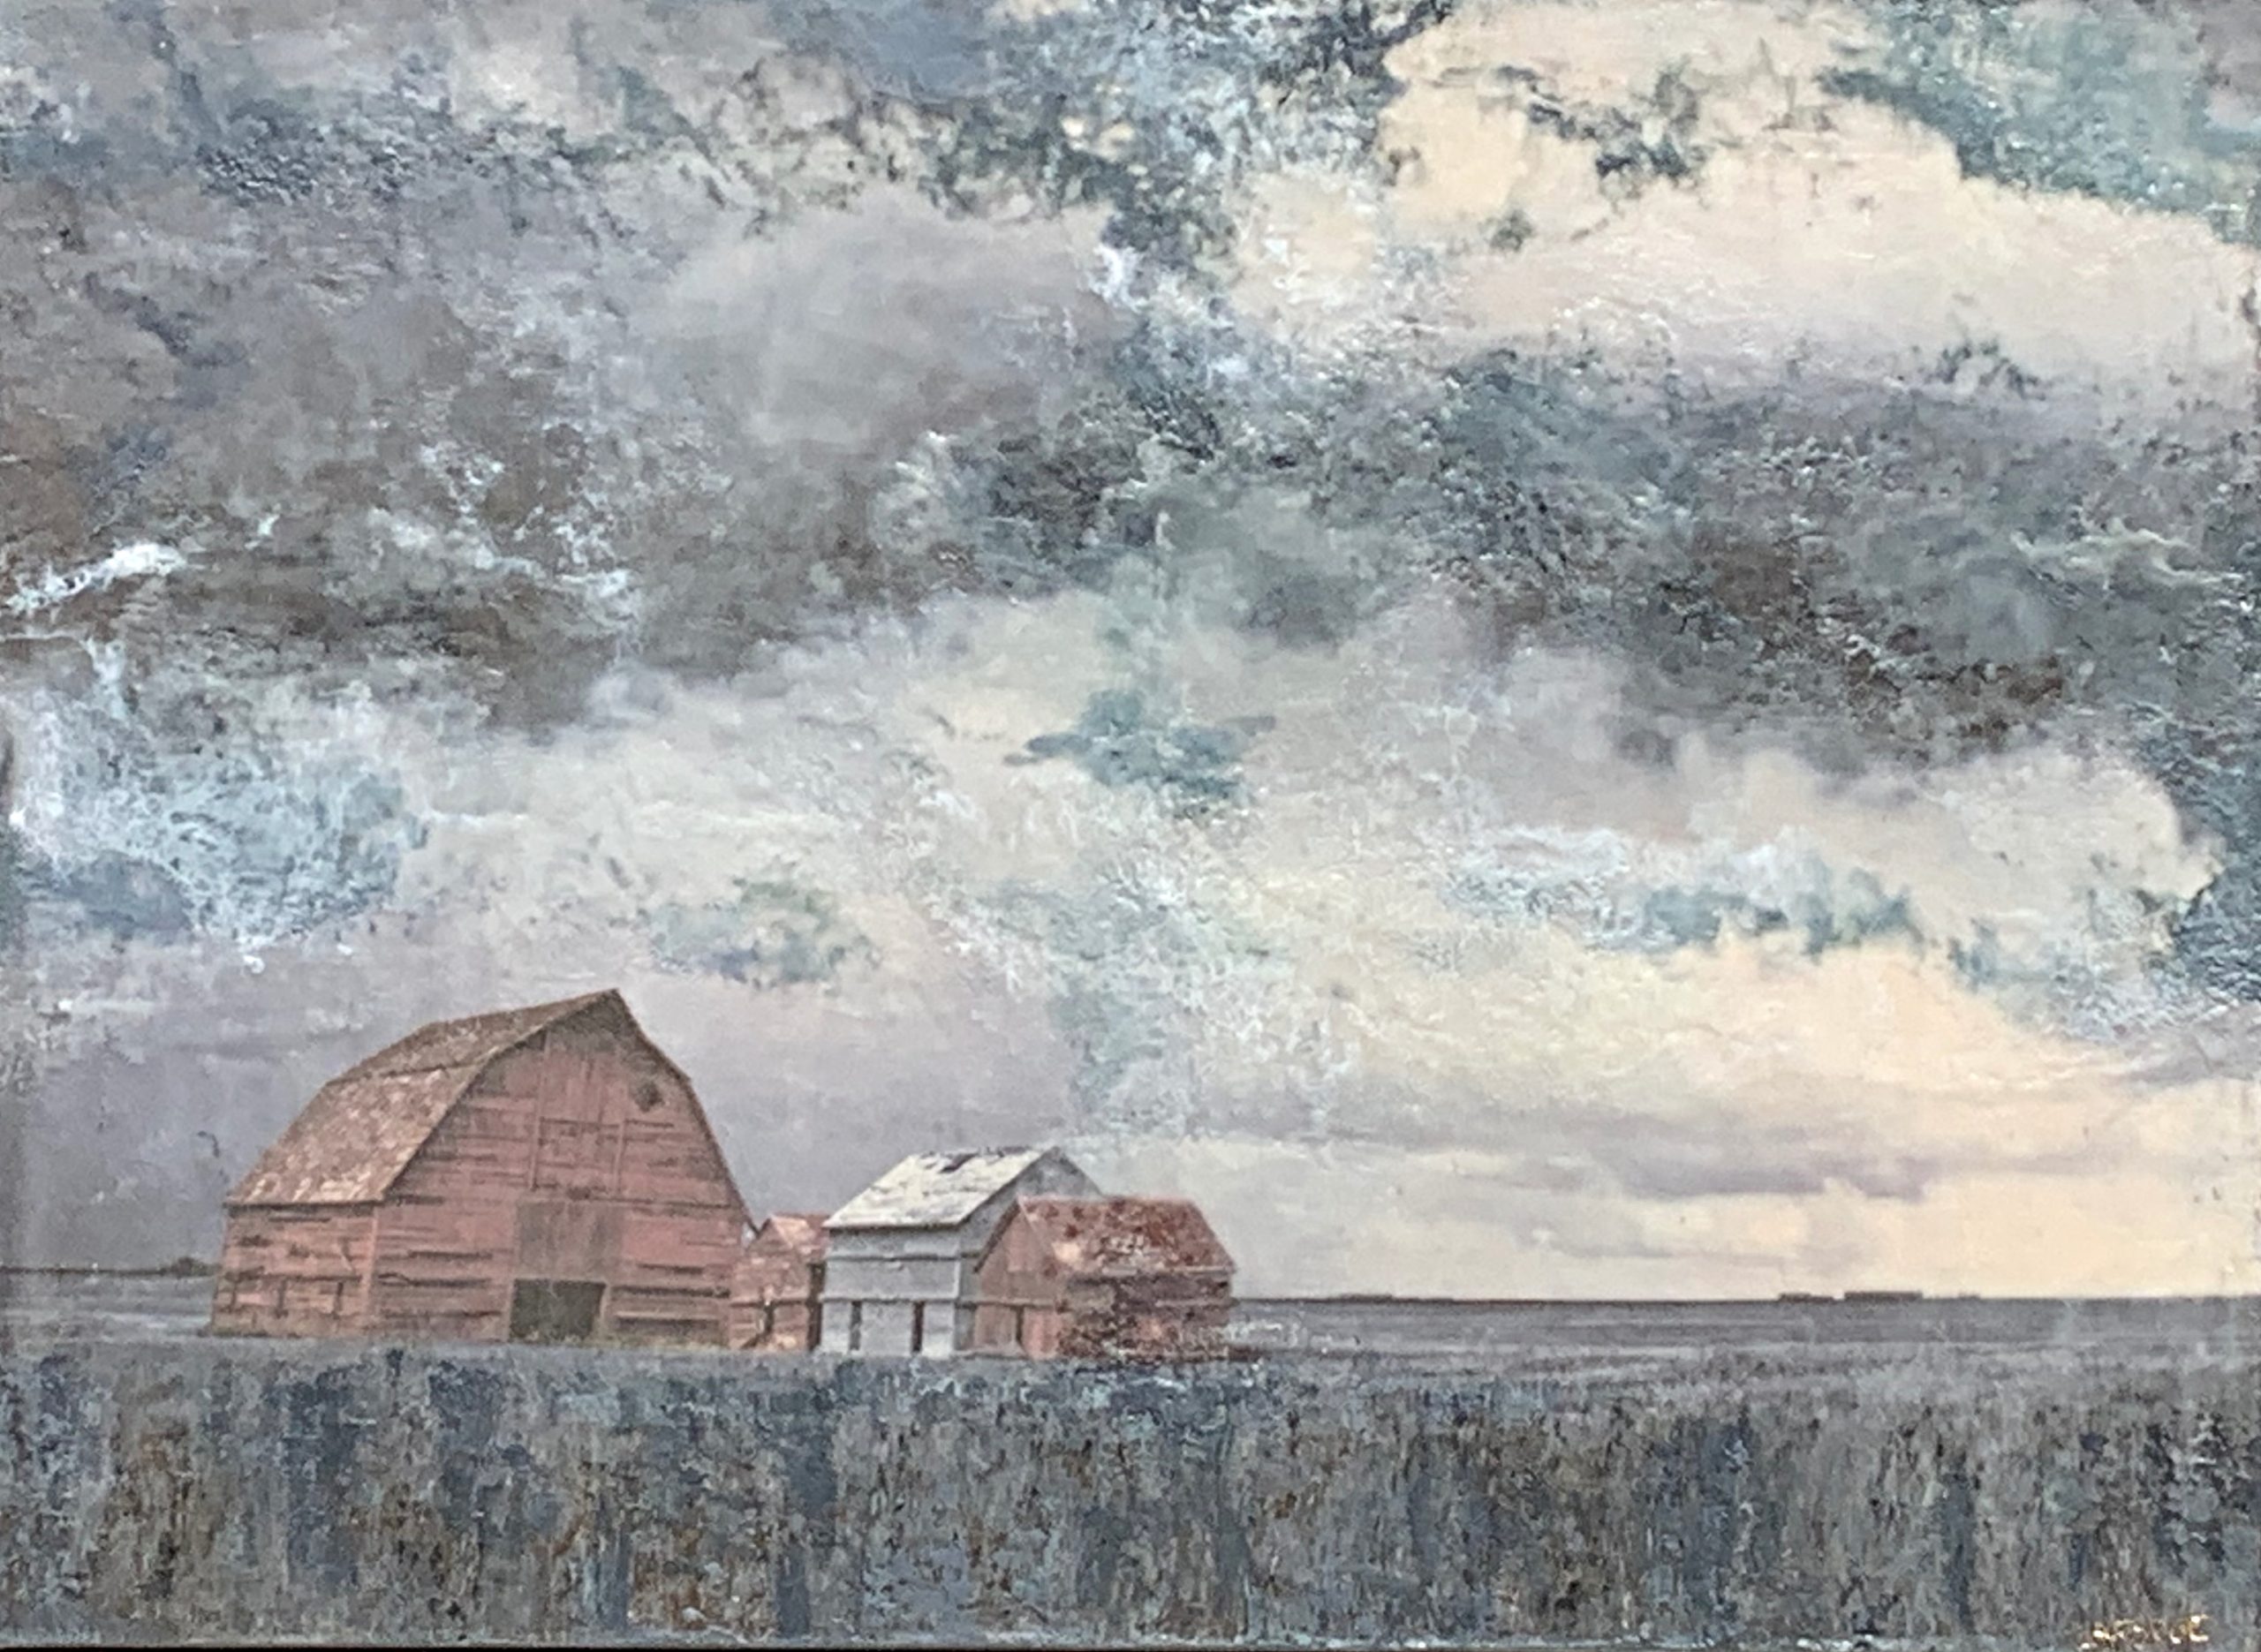 Storm Clouds Coming, encaustic barn painting by Lee Anne LaForge  | Effusion Art Gallery + Cast Glass Studio, Invermere BC